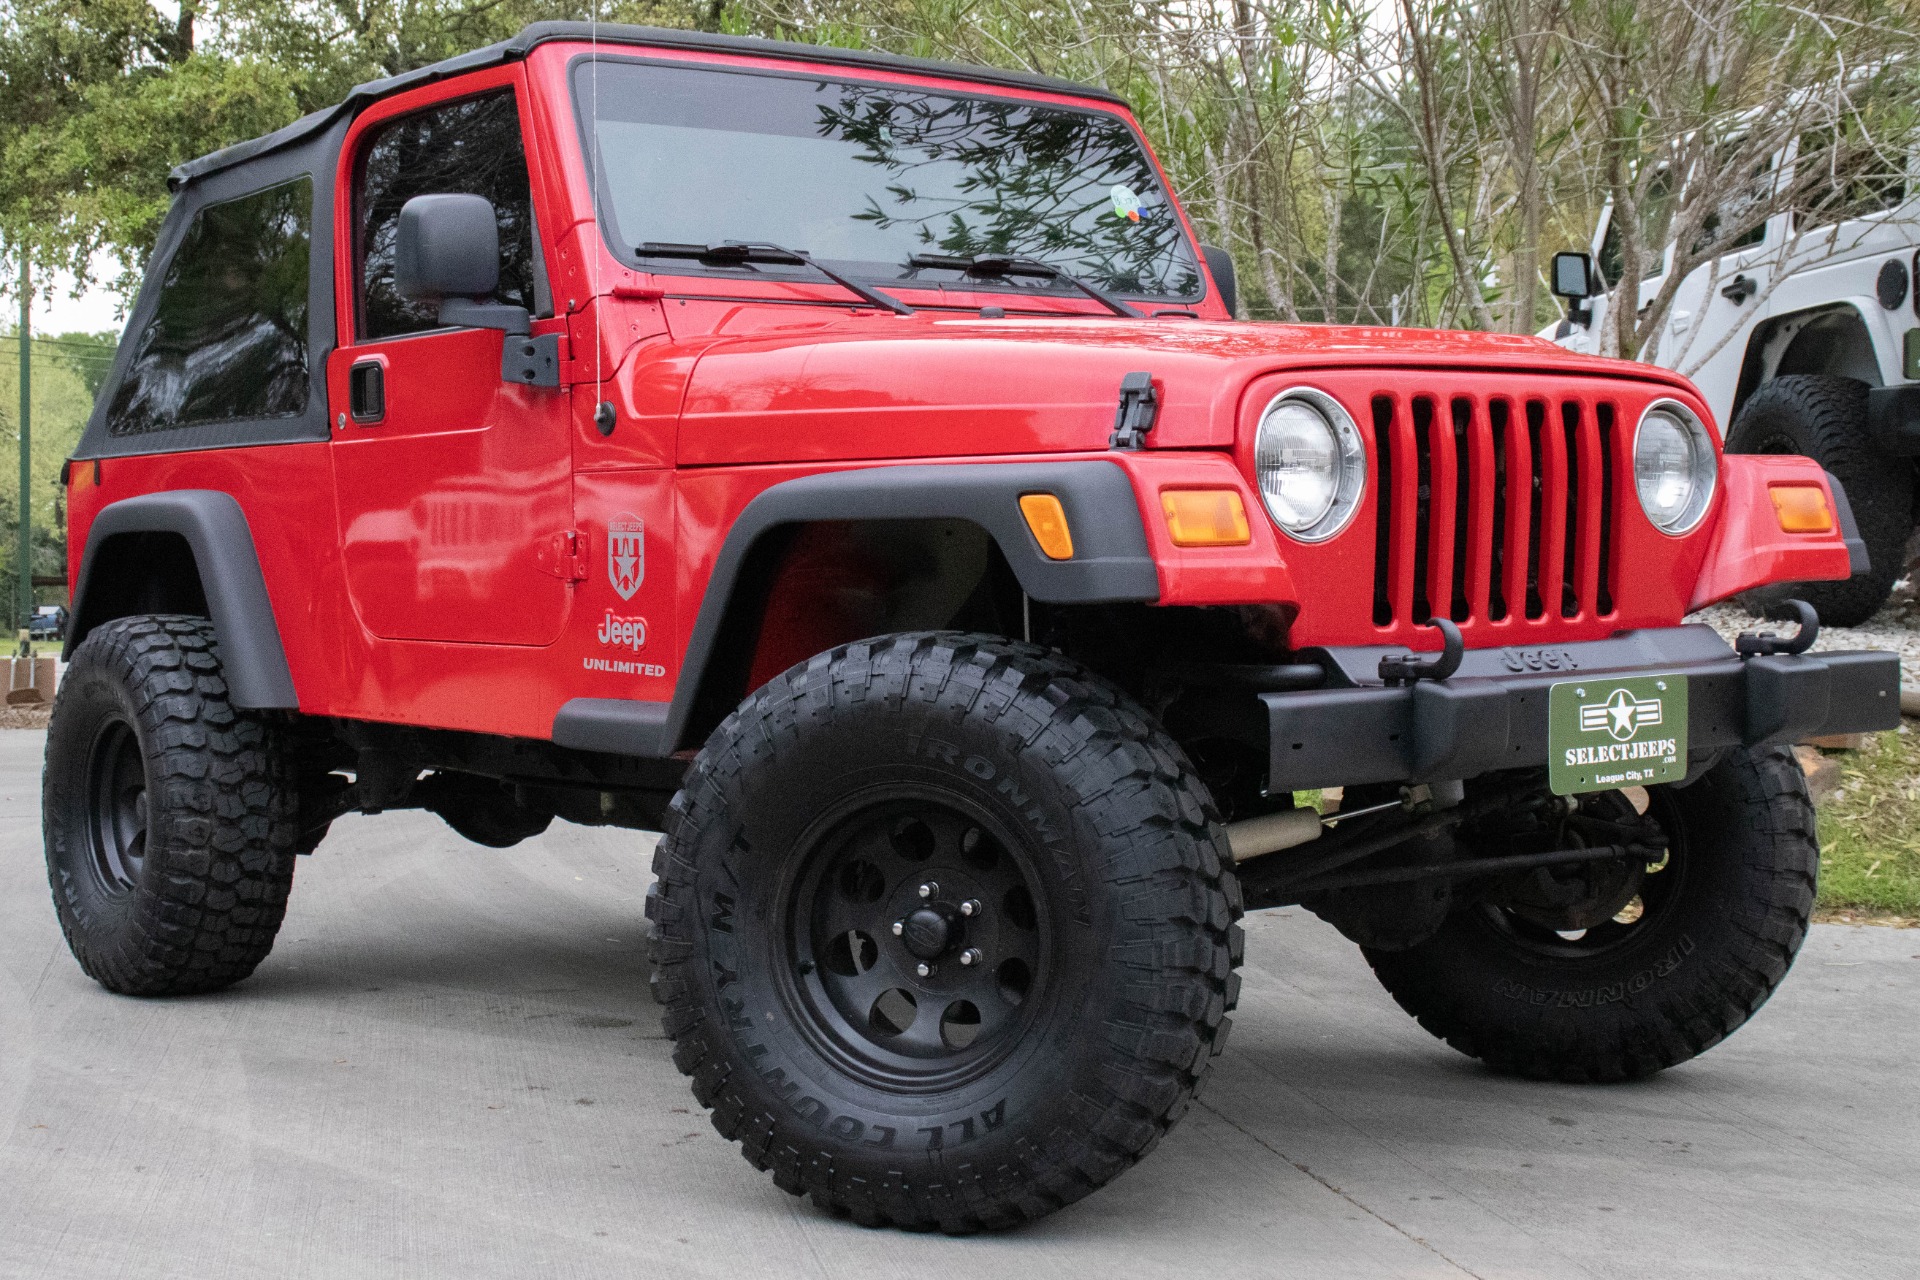 Used 2005 Jeep Wrangler Unlimited For Sale ($15,995) | Select Jeeps Inc.  Stock #308073